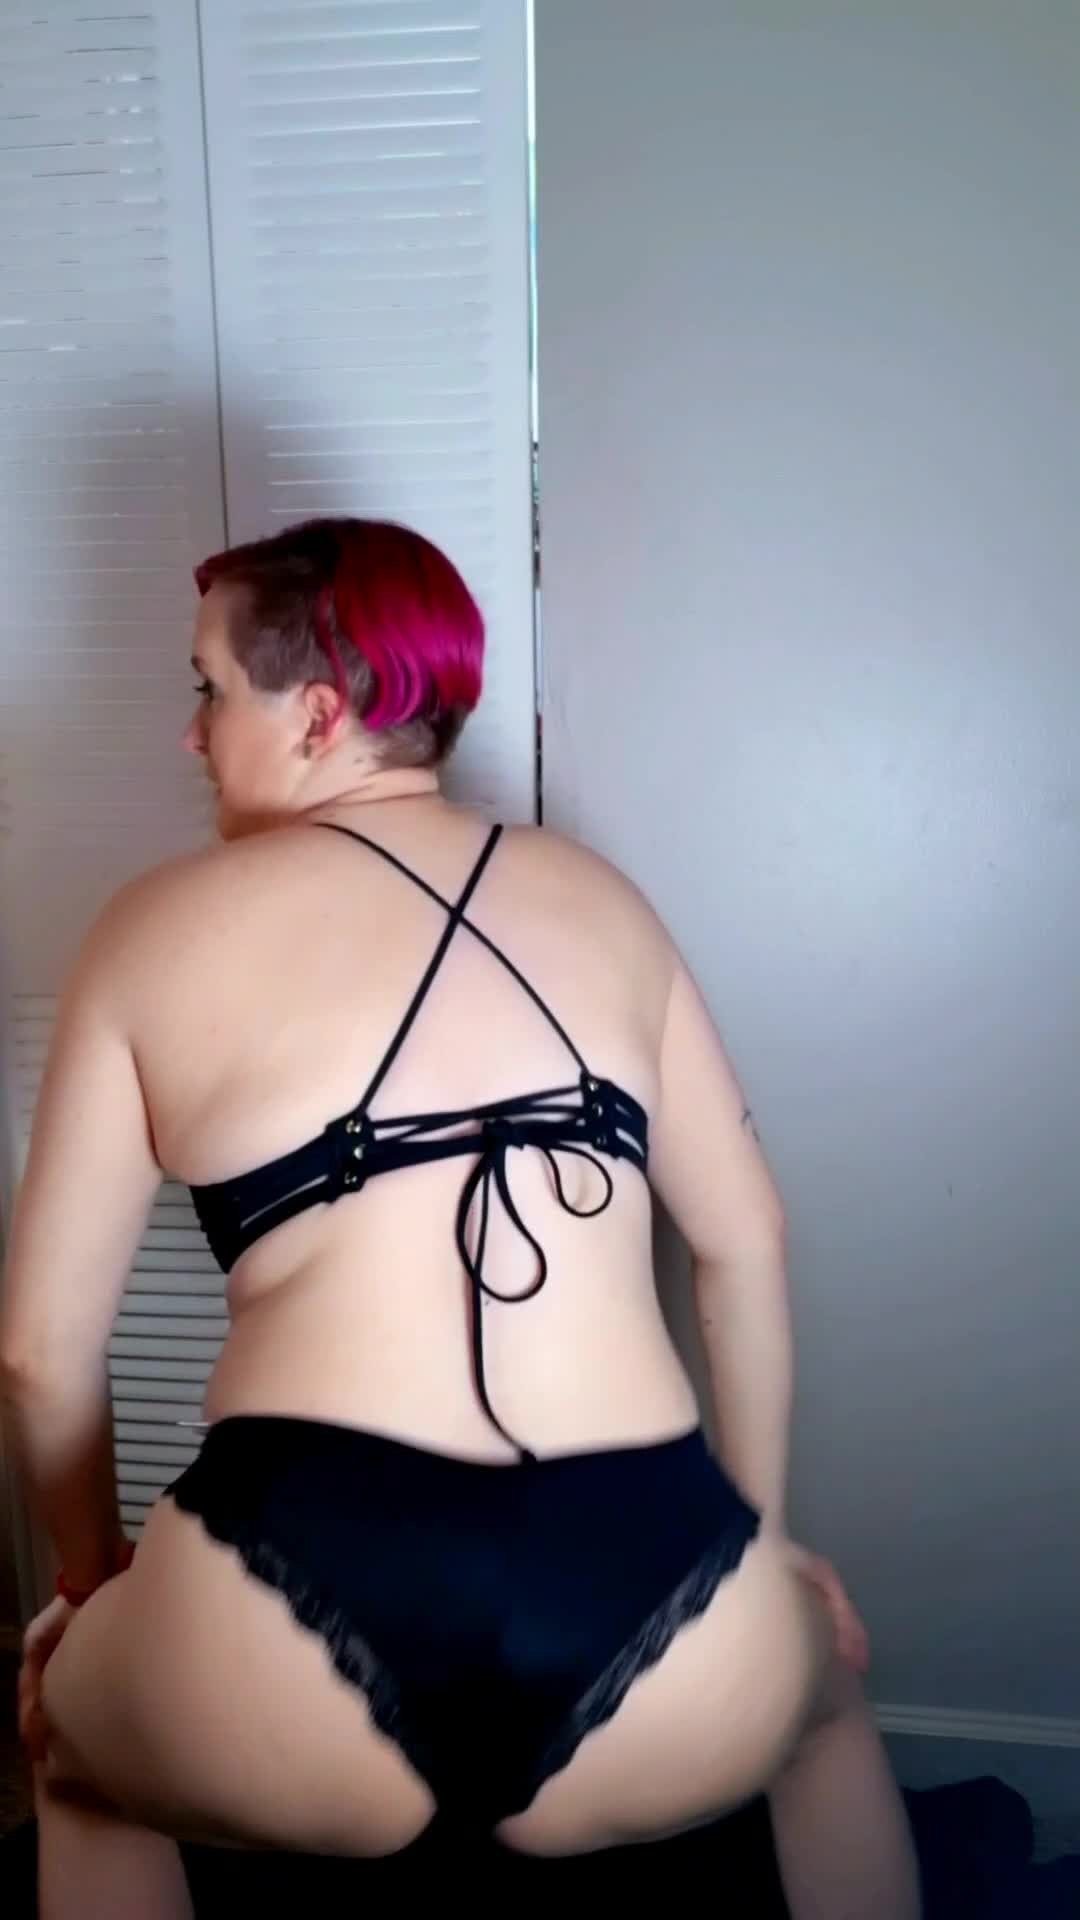 Video by Kennedy Channing with the username @kennedy36dd, who is a verified user,  April 5, 2024 at 12:24 PM and the text says 'https://Onlyfans.com/kennedy36dd 

Manyvids.com Kennedy Channing 

#kennedy36dd
#manyvids  #picoftheday #milf #curvy #curves #thicc #booty #babe #sexy #bustywomen #mature #model #tiktok #onlyfansgirl #boobs #bigtits #picoftheday #pawg #cute #bigass'